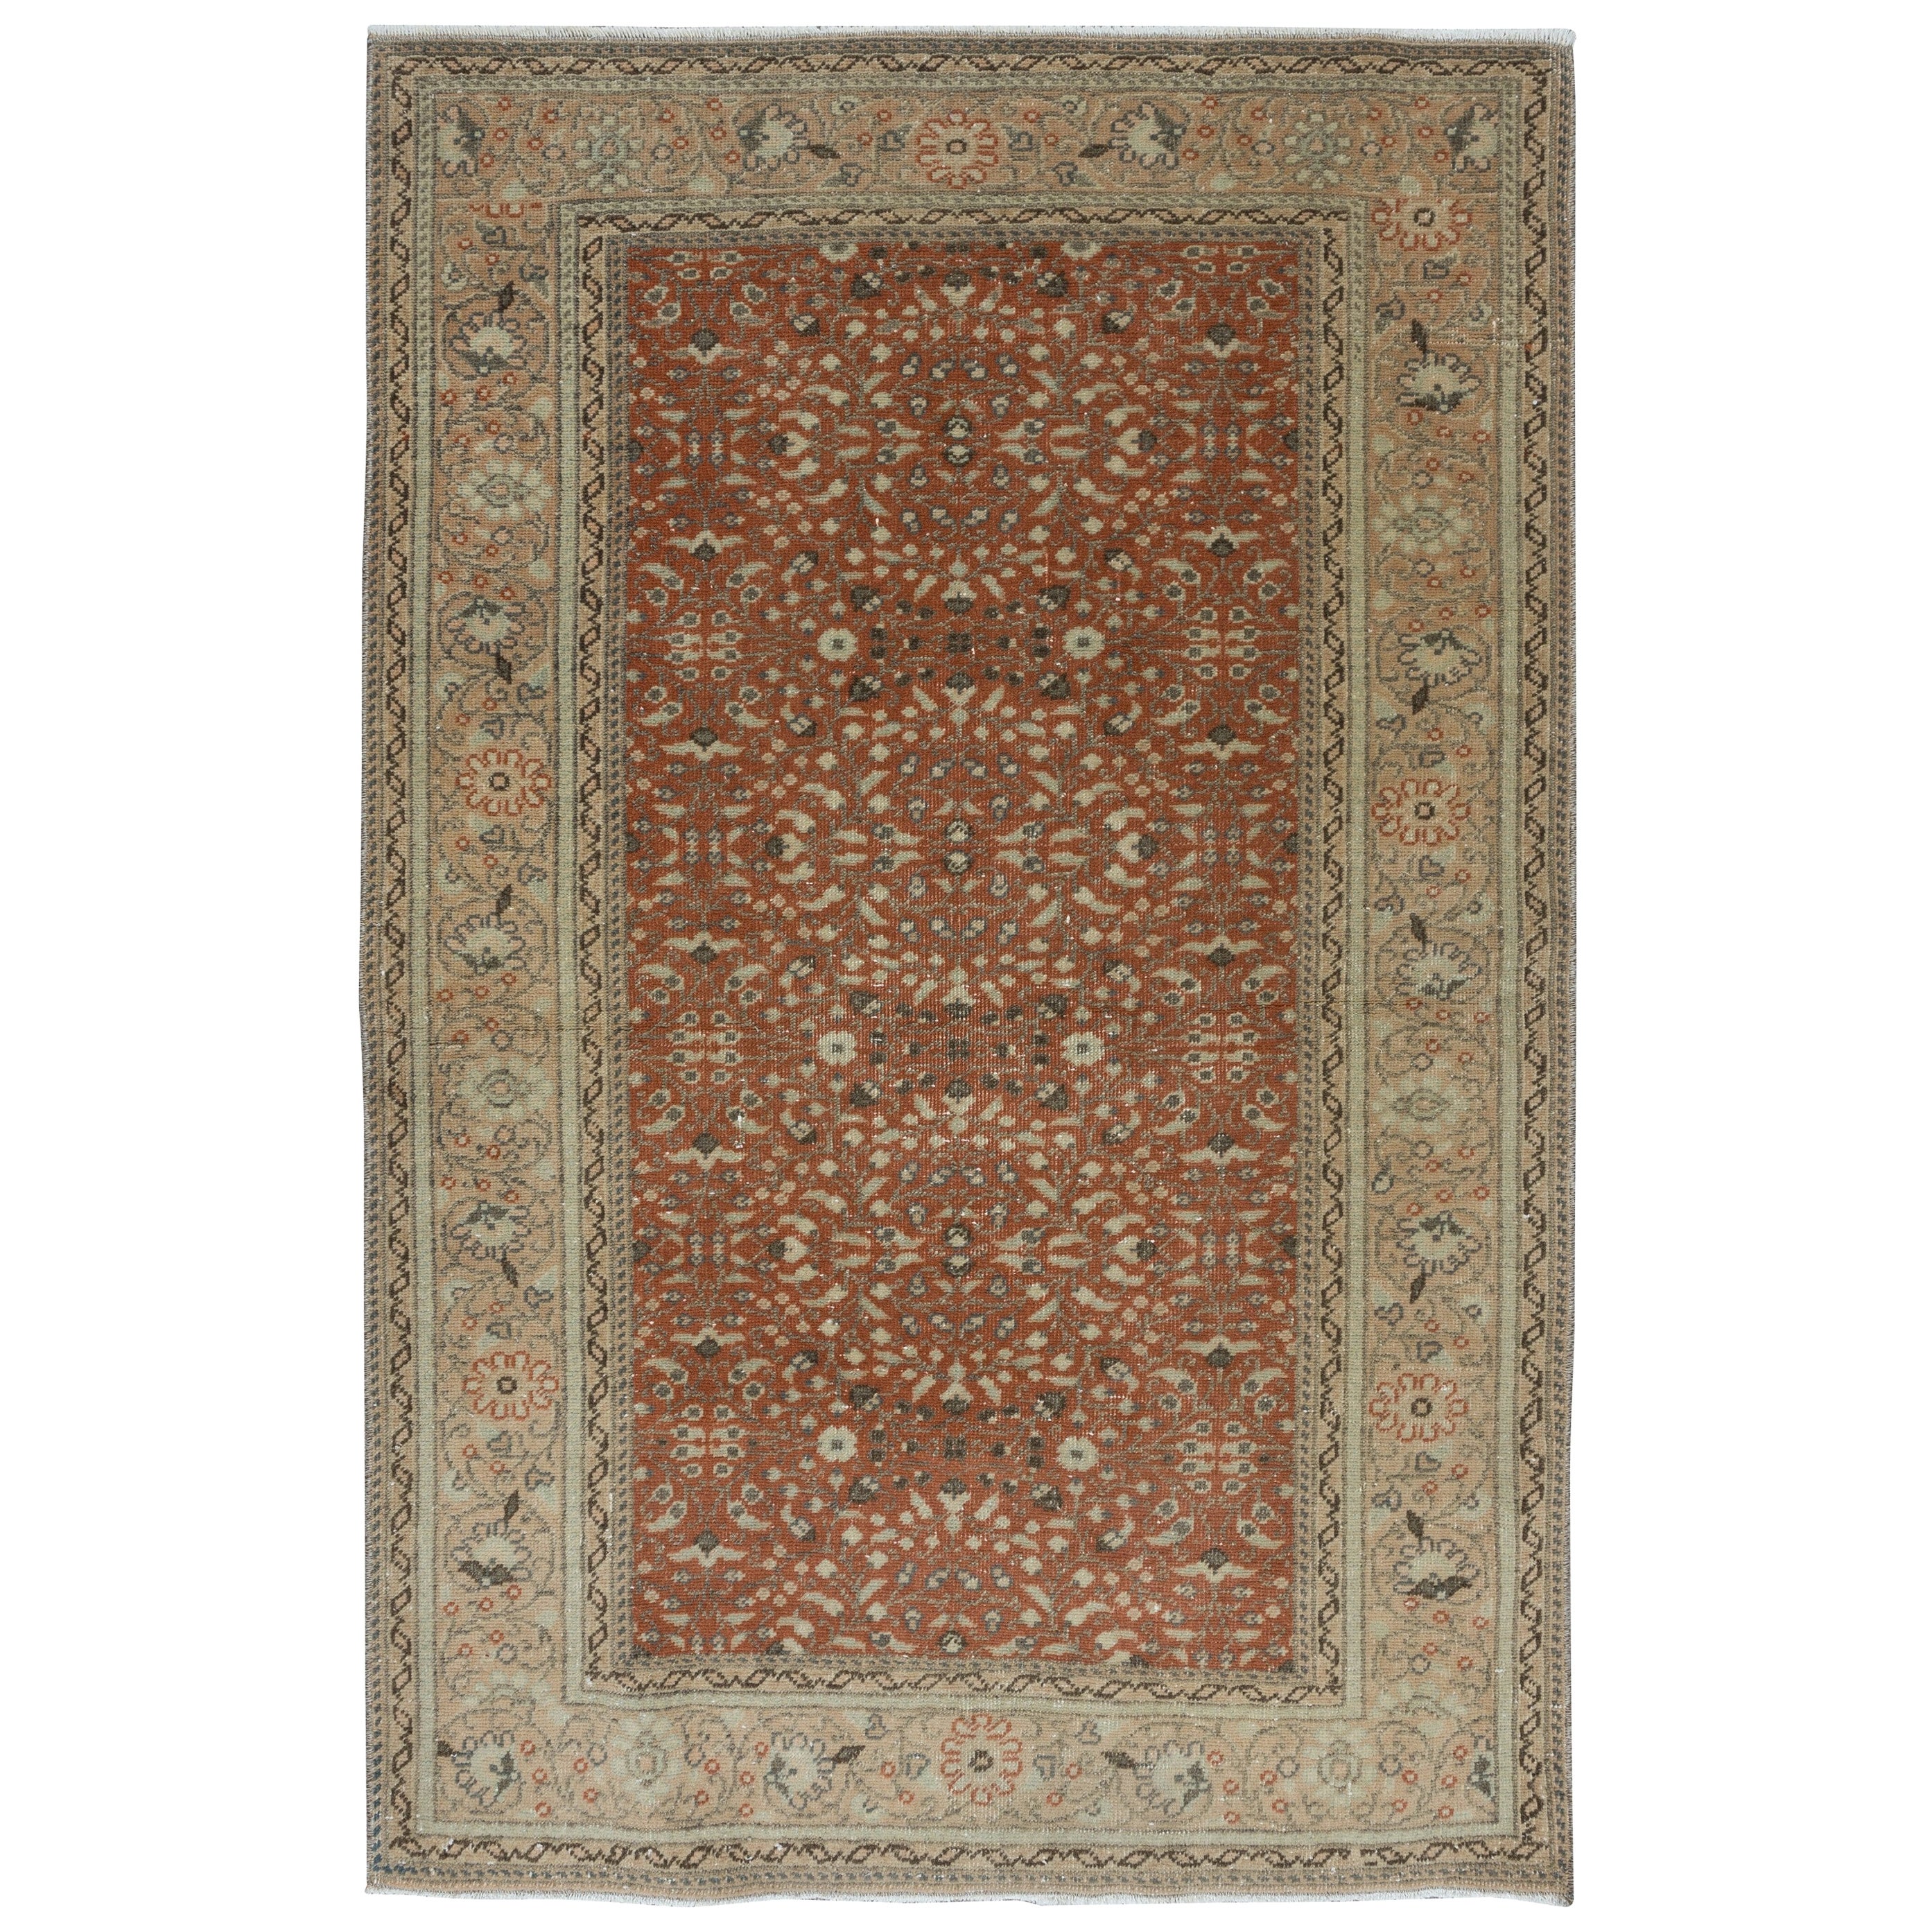 2.8x4.3 Ft Mid-Century Handmade Turkish Small Rug with All-Over Floral Design (en anglais) en vente